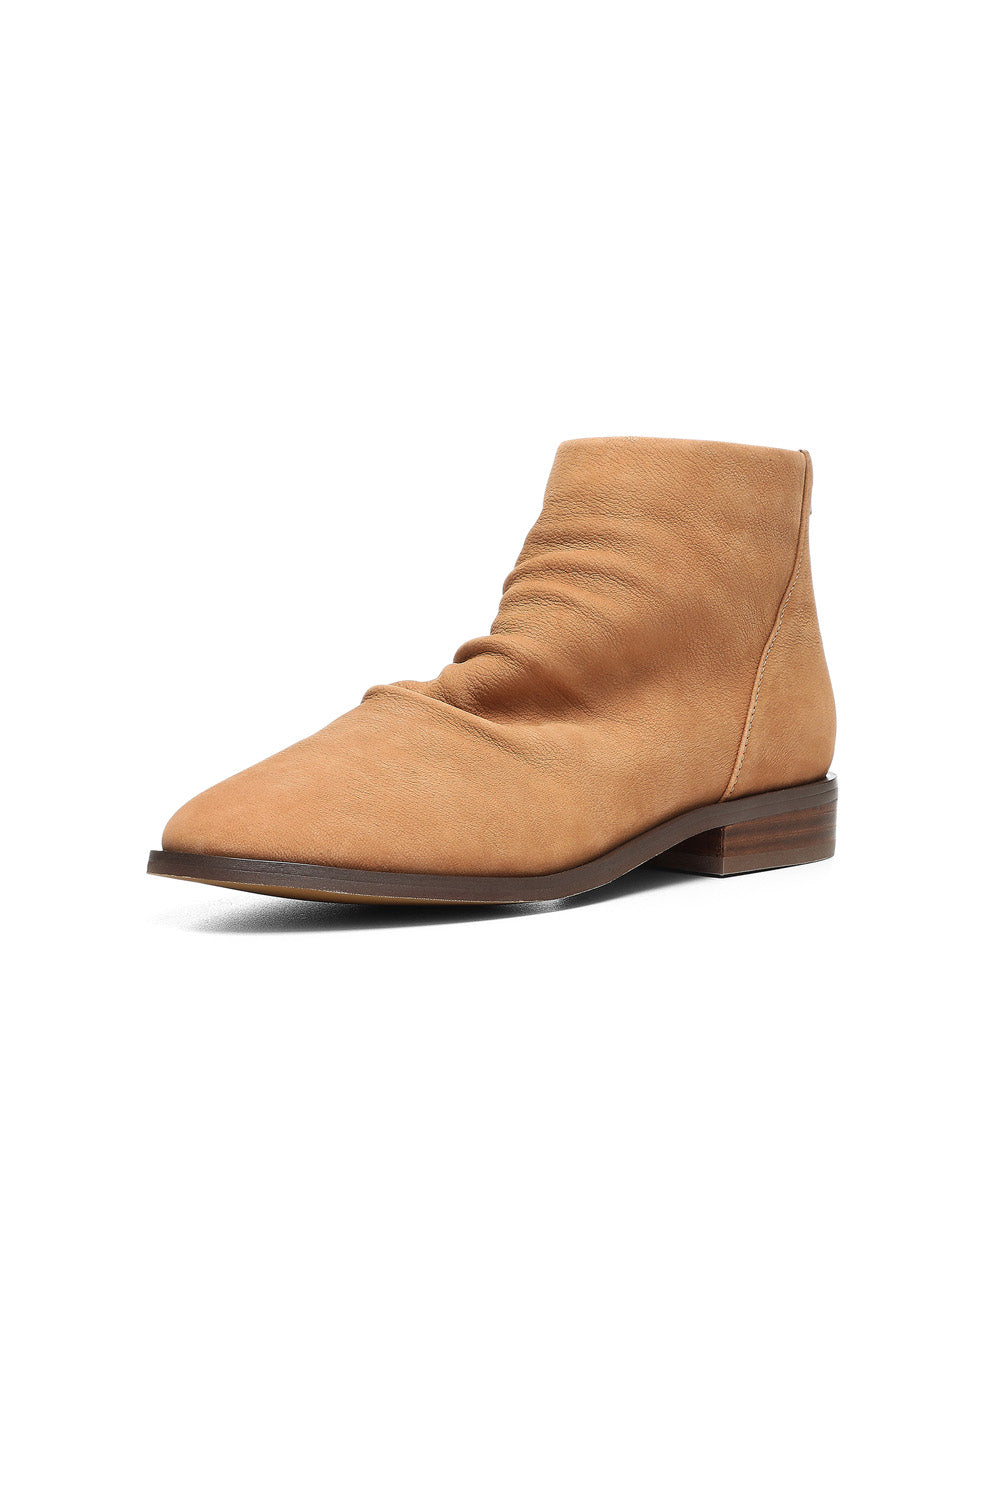 NYDJ Cailian Booties In Leather - Saddle